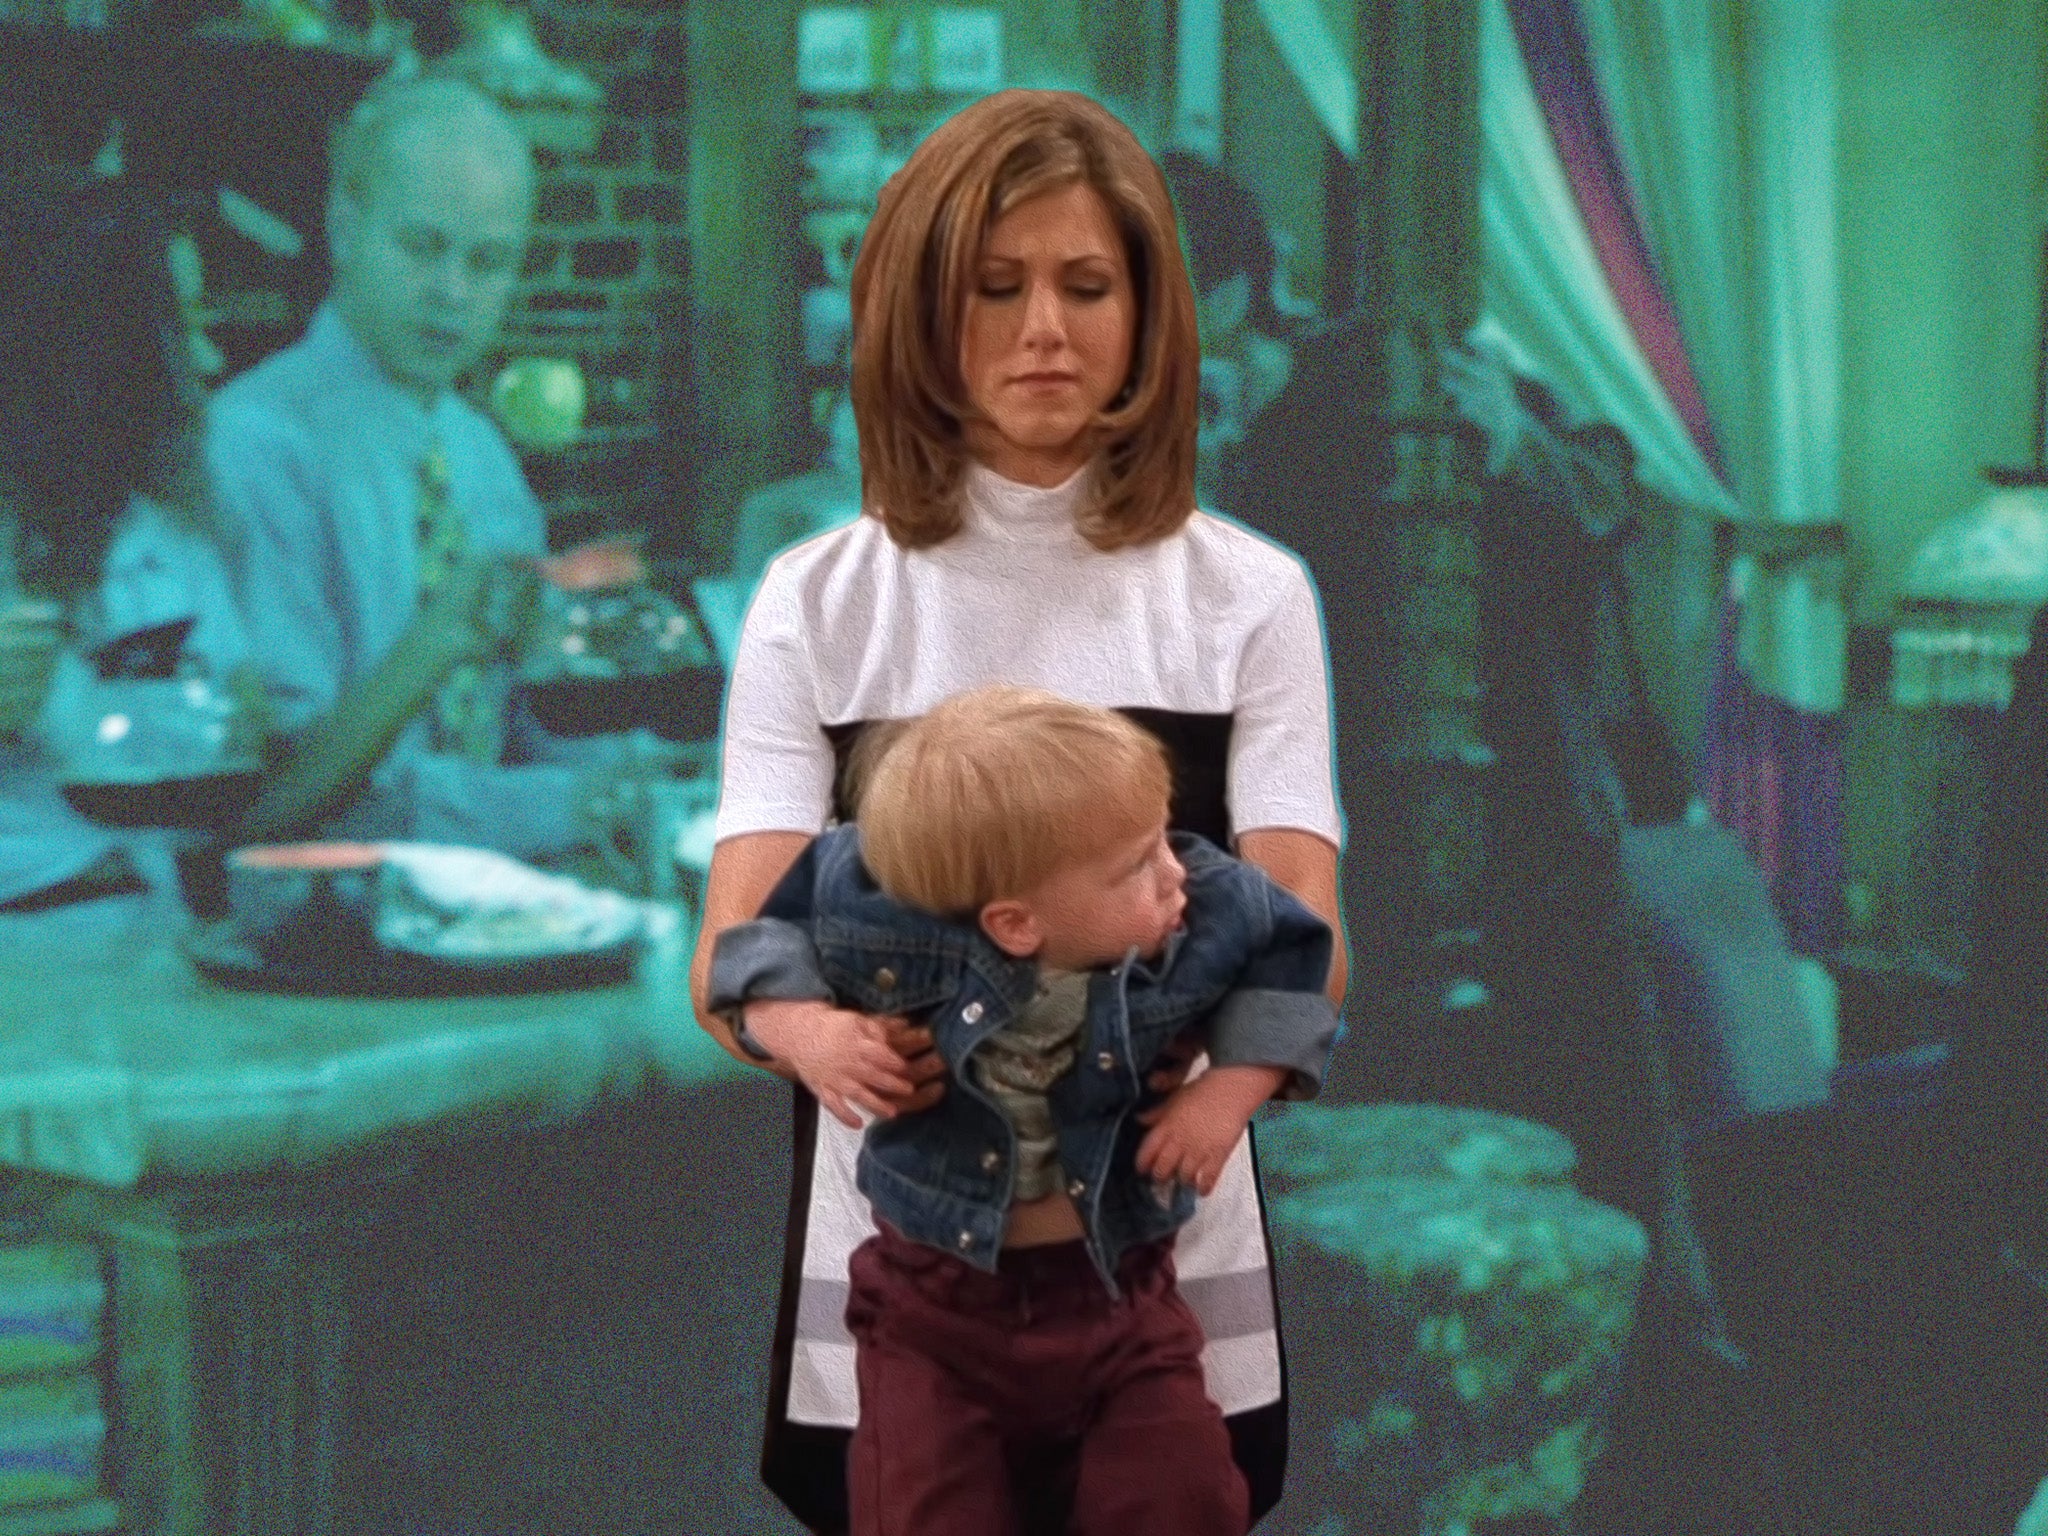 Jennifer Aniston’s Rachel, at this point sans children, struggles to hold her boyfriend’s baby in an early episode of ‘Friends’